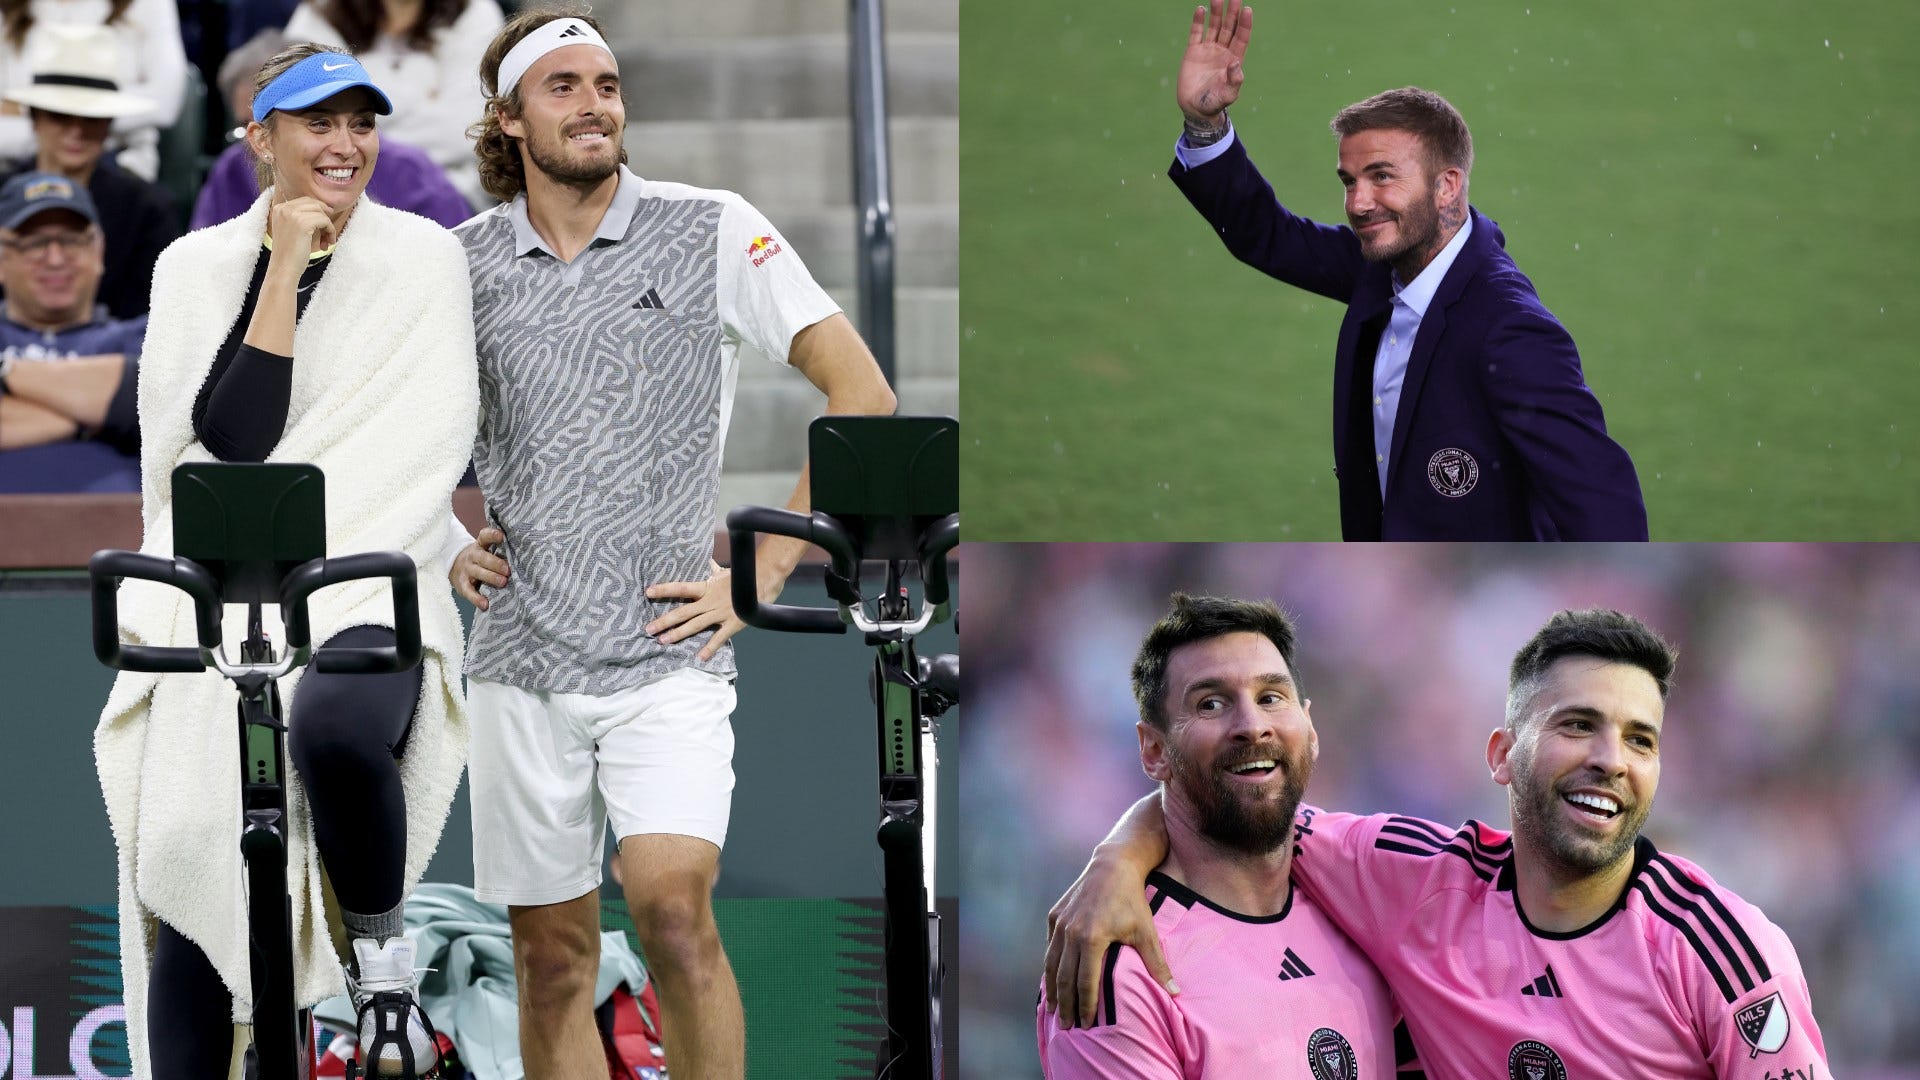 Inter Miami host Stefanos Tsitsipas & Paula Badosa! Tennis power couple gifted Lionel Messi jerseys as they meet Jordi Alba & Sergio Busquets after being welcomed to MLS club by David Beckham